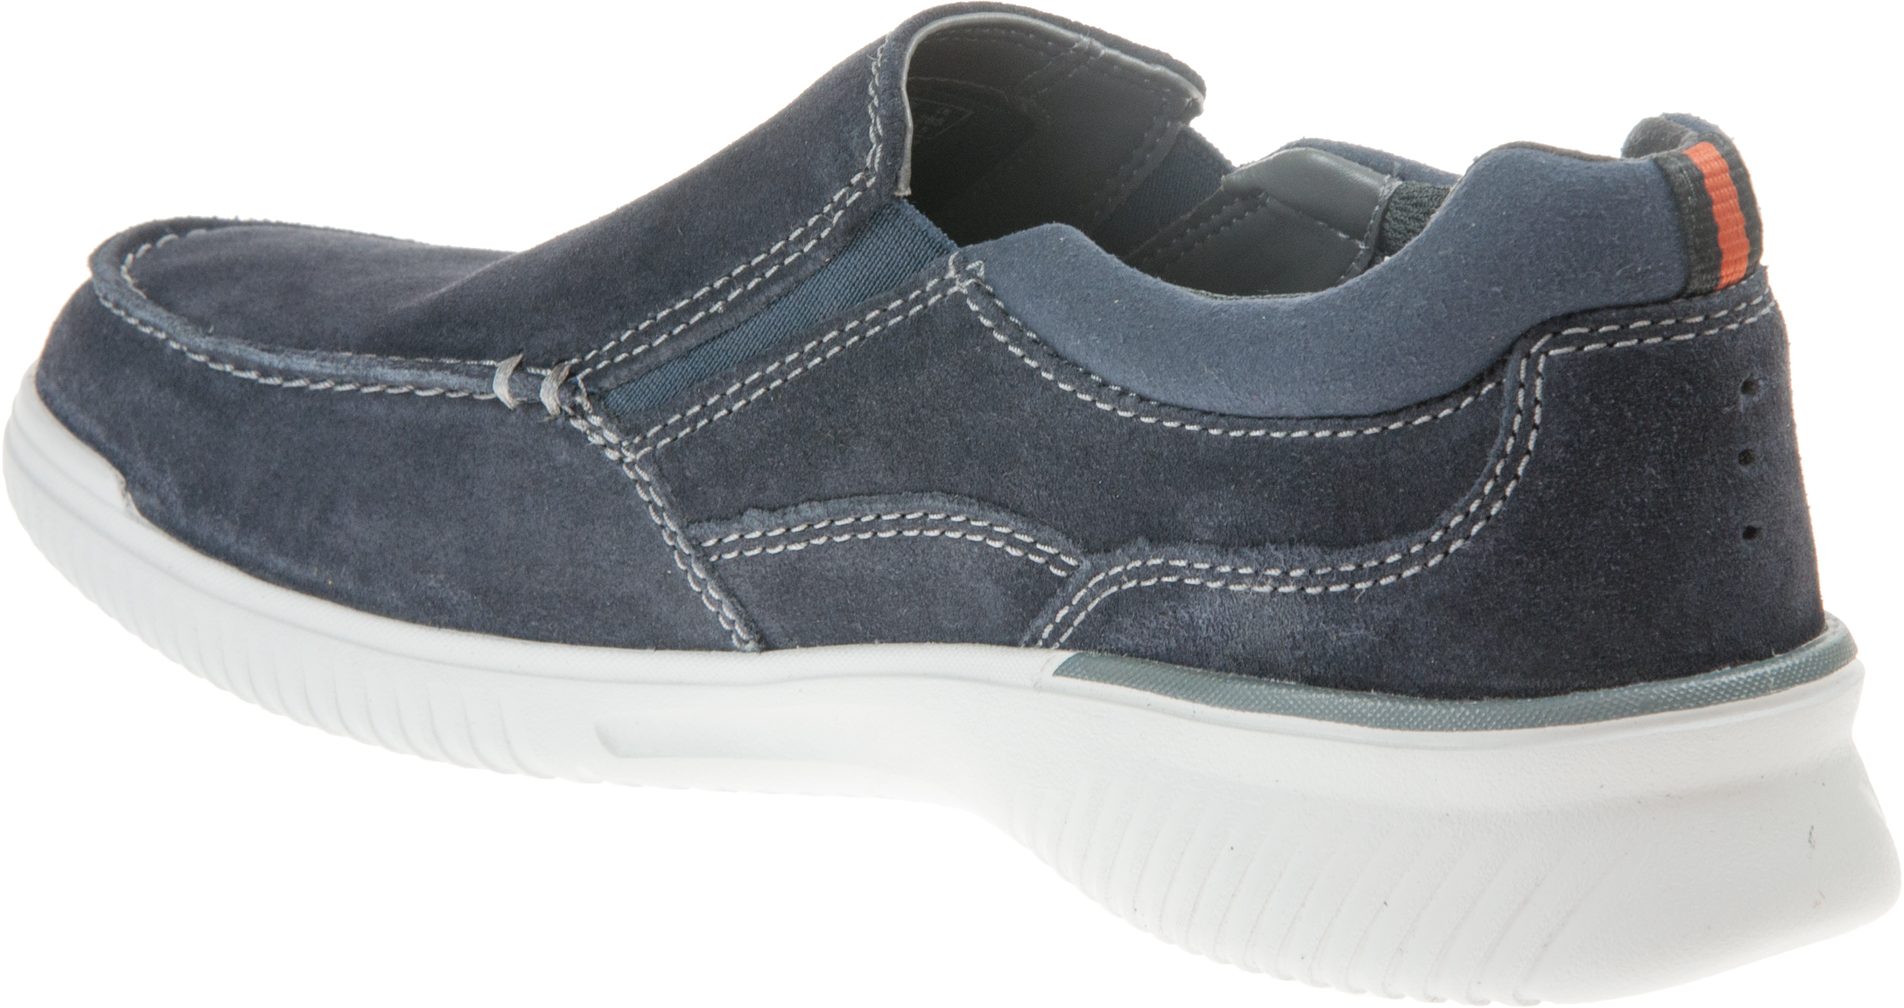 Clarks Donaway Free Navy Waxy 26165985 - Casual Shoes - Humphries Shoes